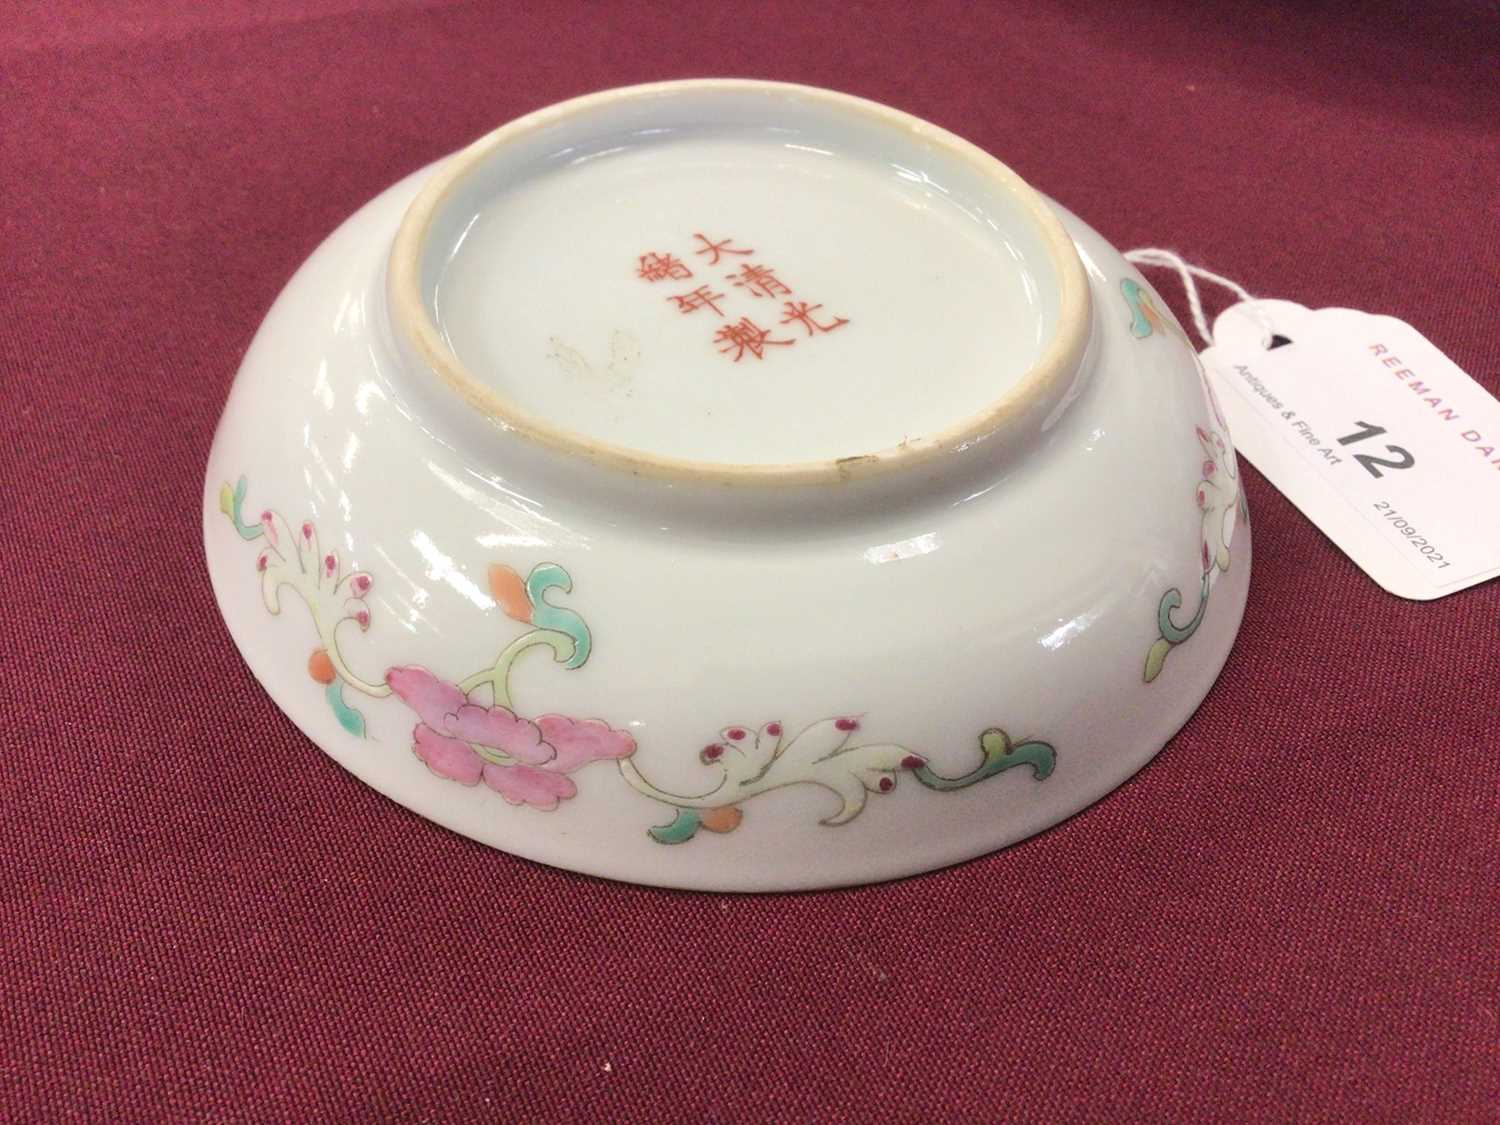 Chinese saucer dish - Image 5 of 9